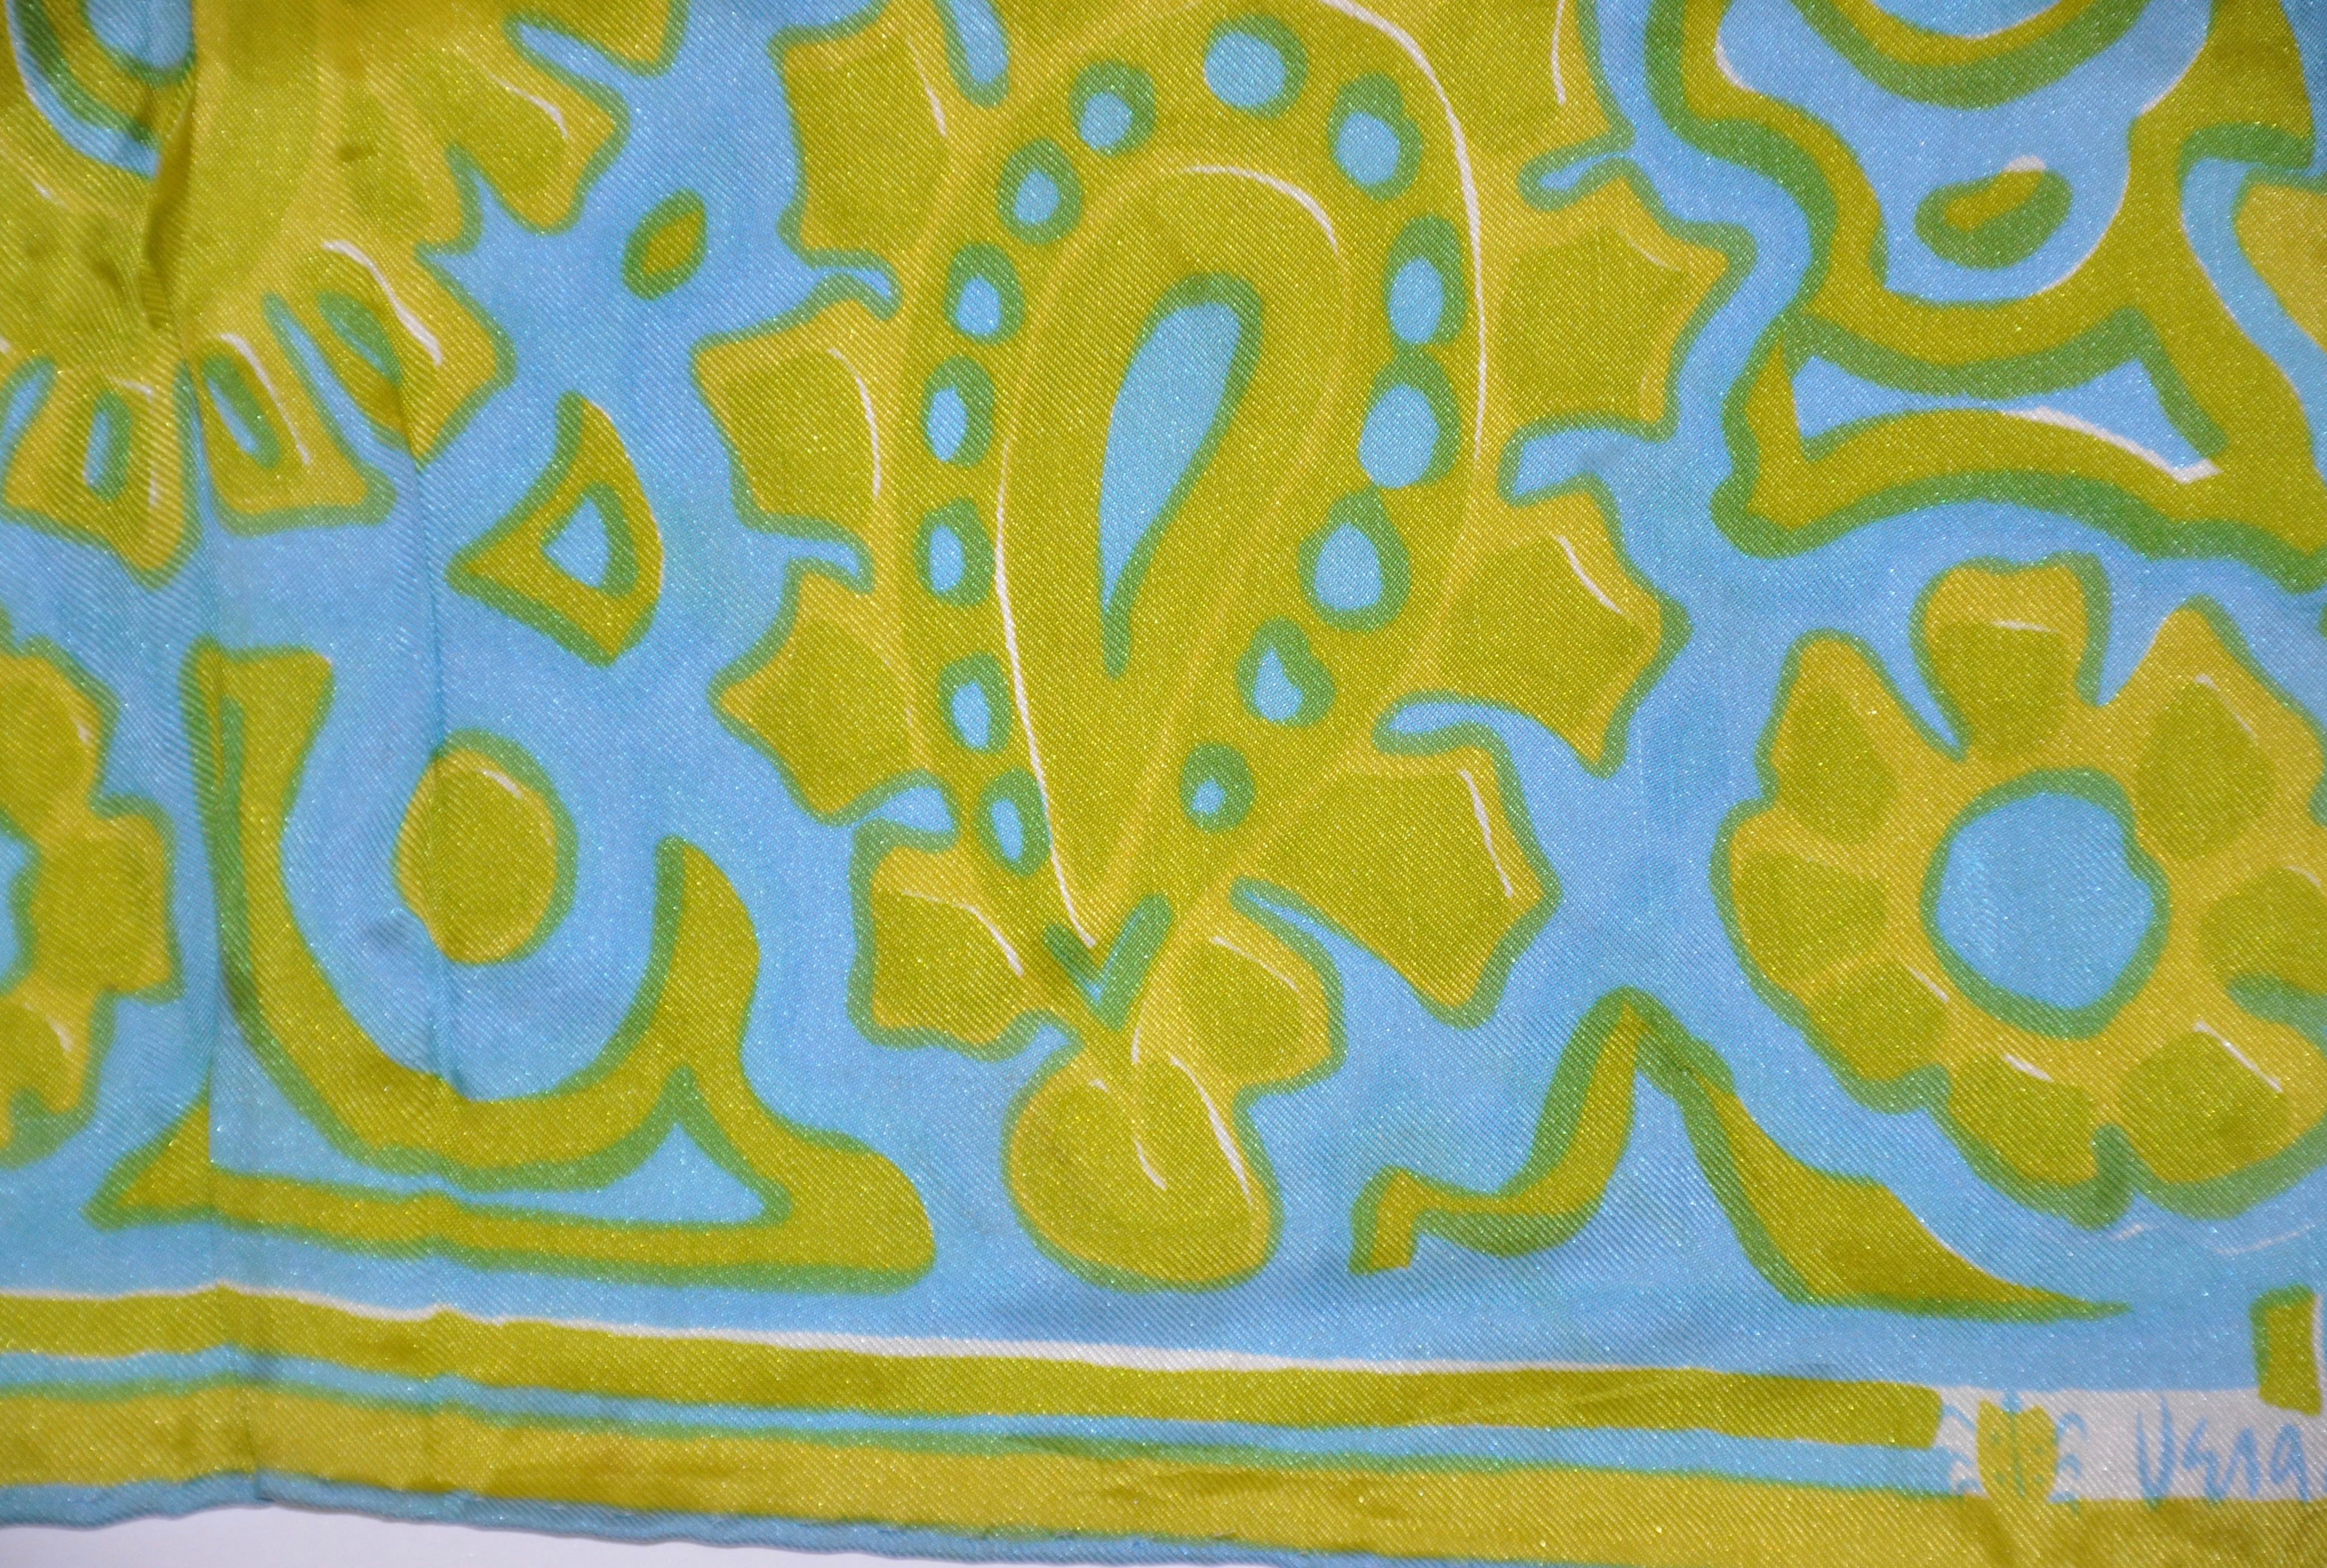        Vera whimsical turquoise and lime 'abstract palsey' print silk scarf is finished with hand-rolled edges and measures 44 inches by 14 1/2 inches. Made in Japan.